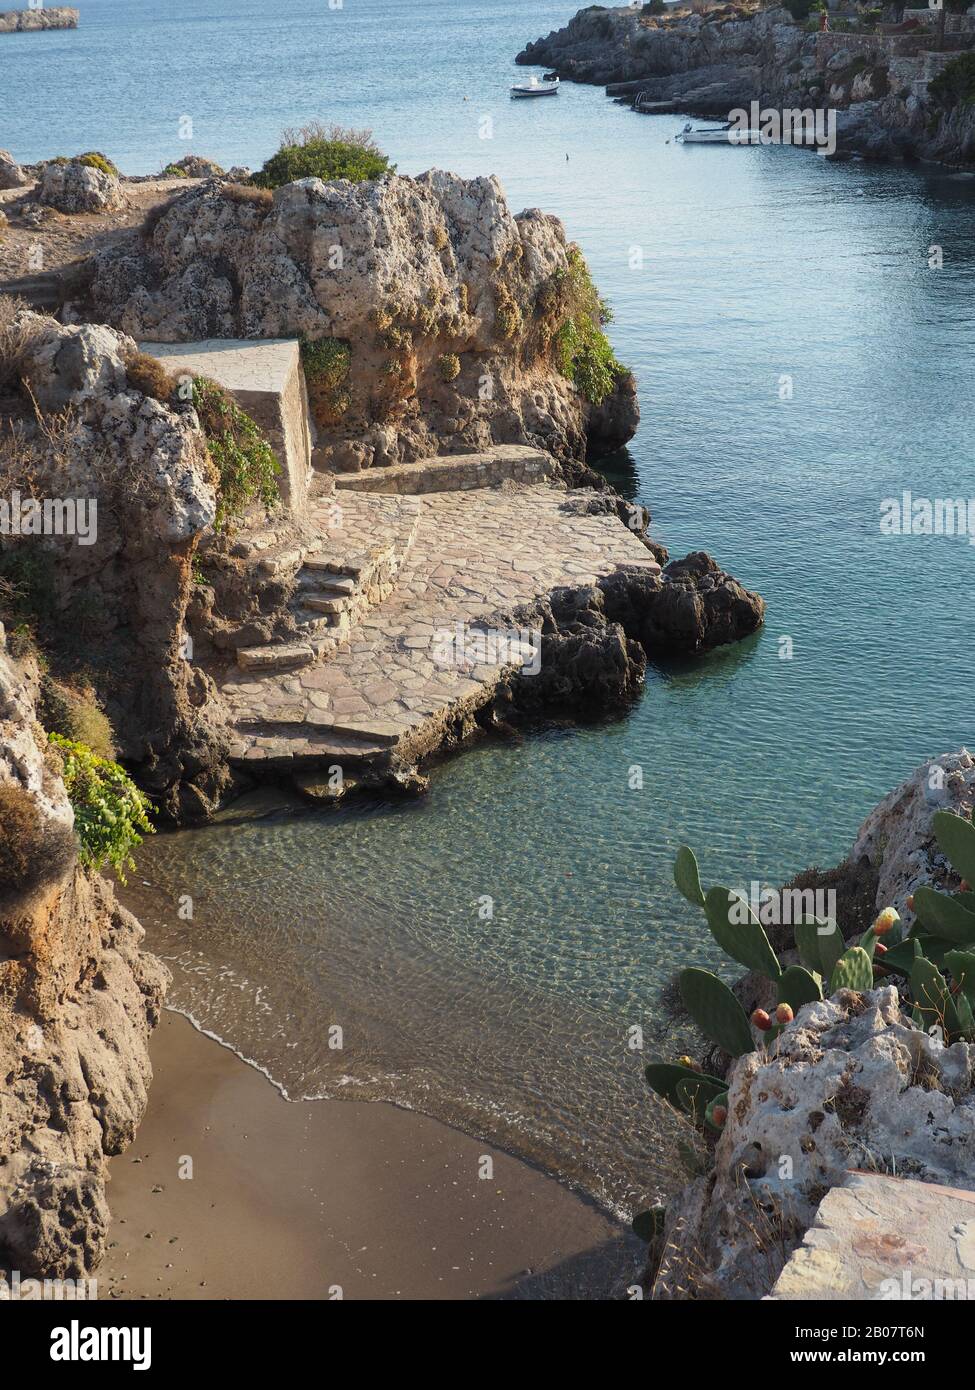 Baths of Aphrodite (Venus). Small harbour and swimming place in village of Aviemonas, Kythira, Greece. Ripples on a blue sea breaking on a sandy beach Stock Photo